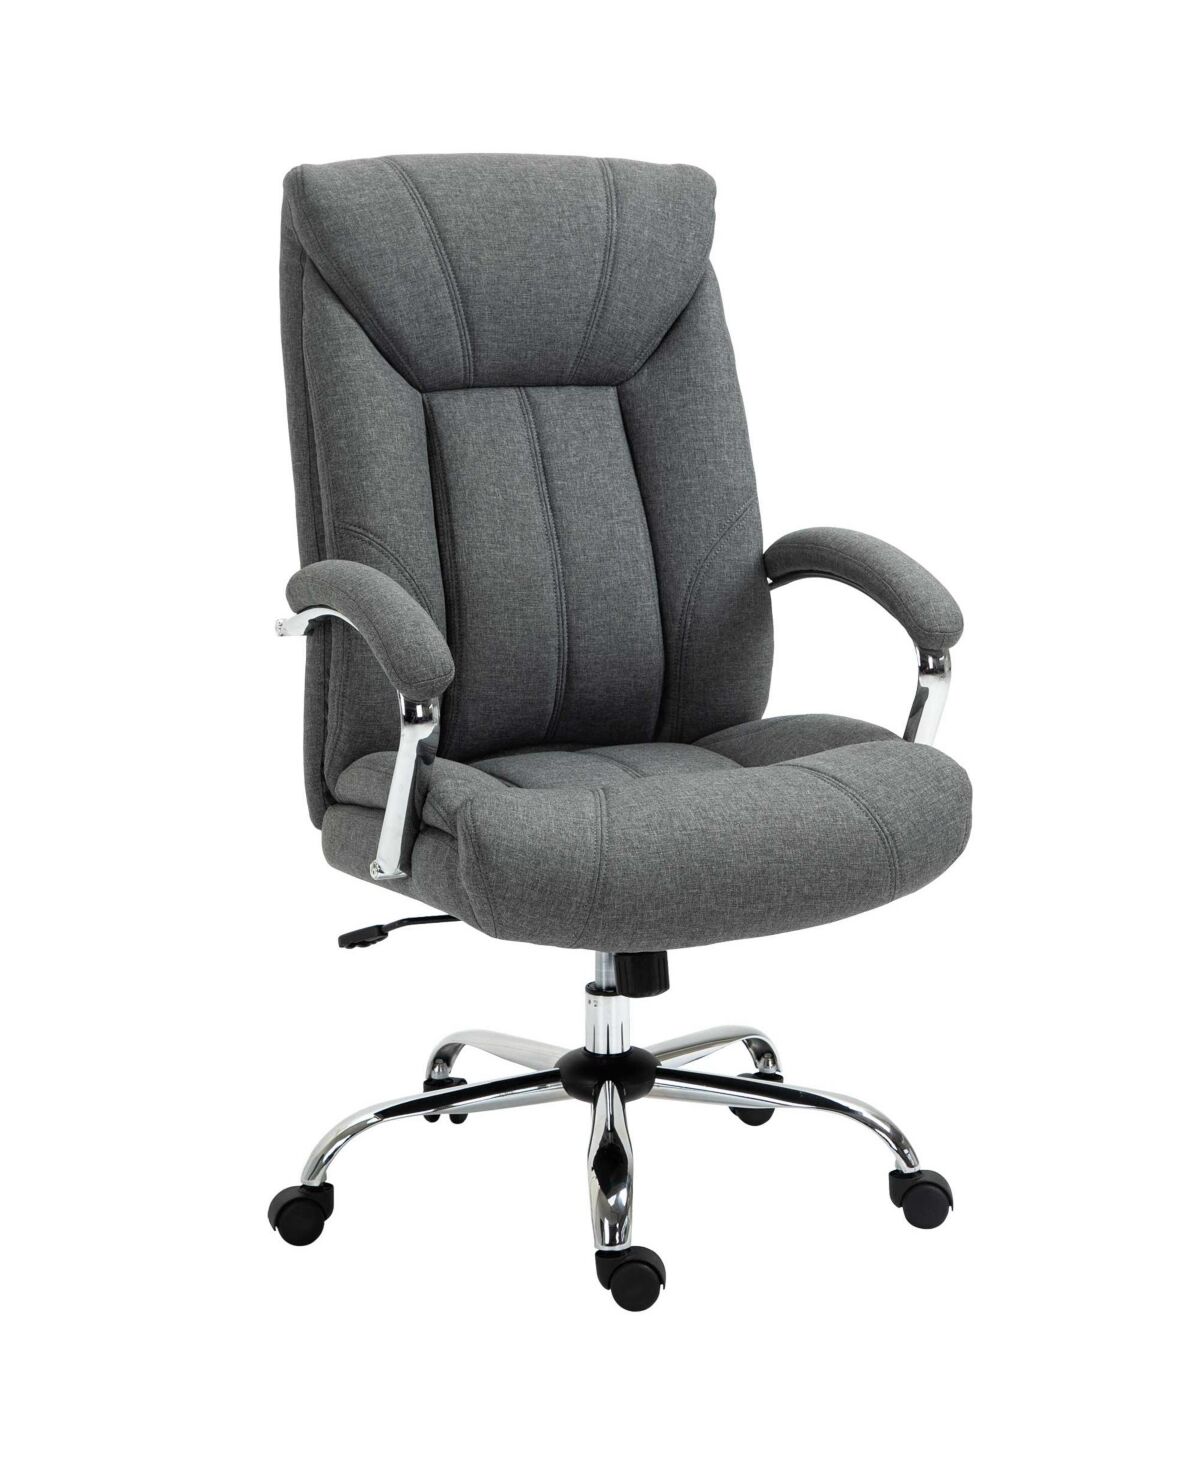 Vinsetto Adjustable Home Office Chair, Computer Desk Chair w/ Padded Seat, Grey - Grey